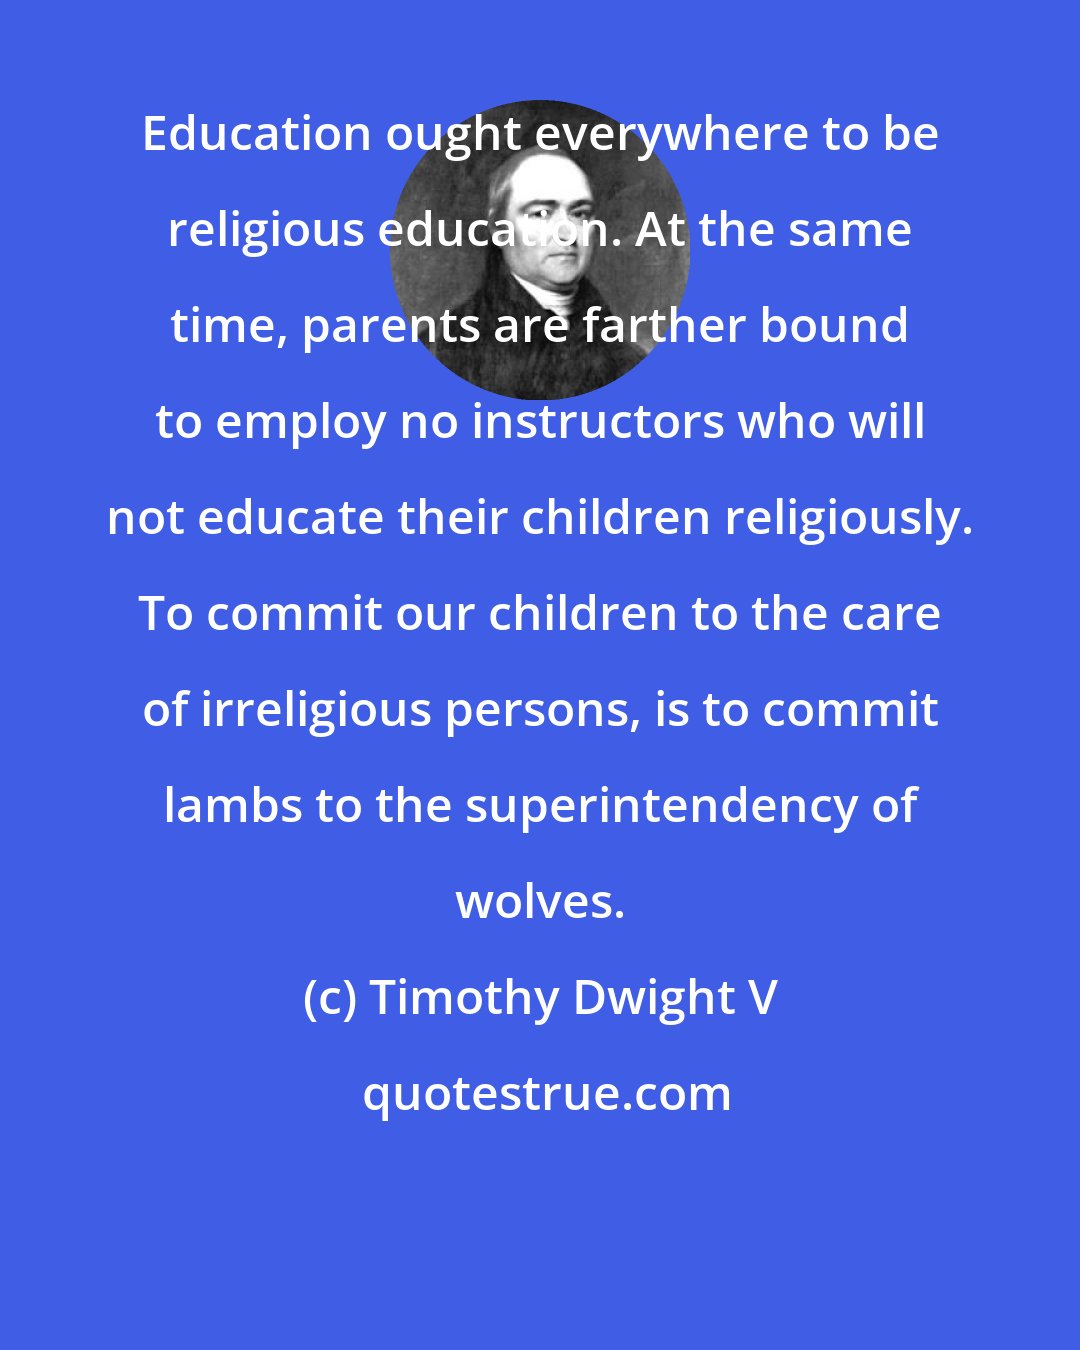 Timothy Dwight V: Education ought everywhere to be religious education. At the same time, parents are farther bound to employ no instructors who will not educate their children religiously. To commit our children to the care of irreligious persons, is to commit lambs to the superintendency of wolves.